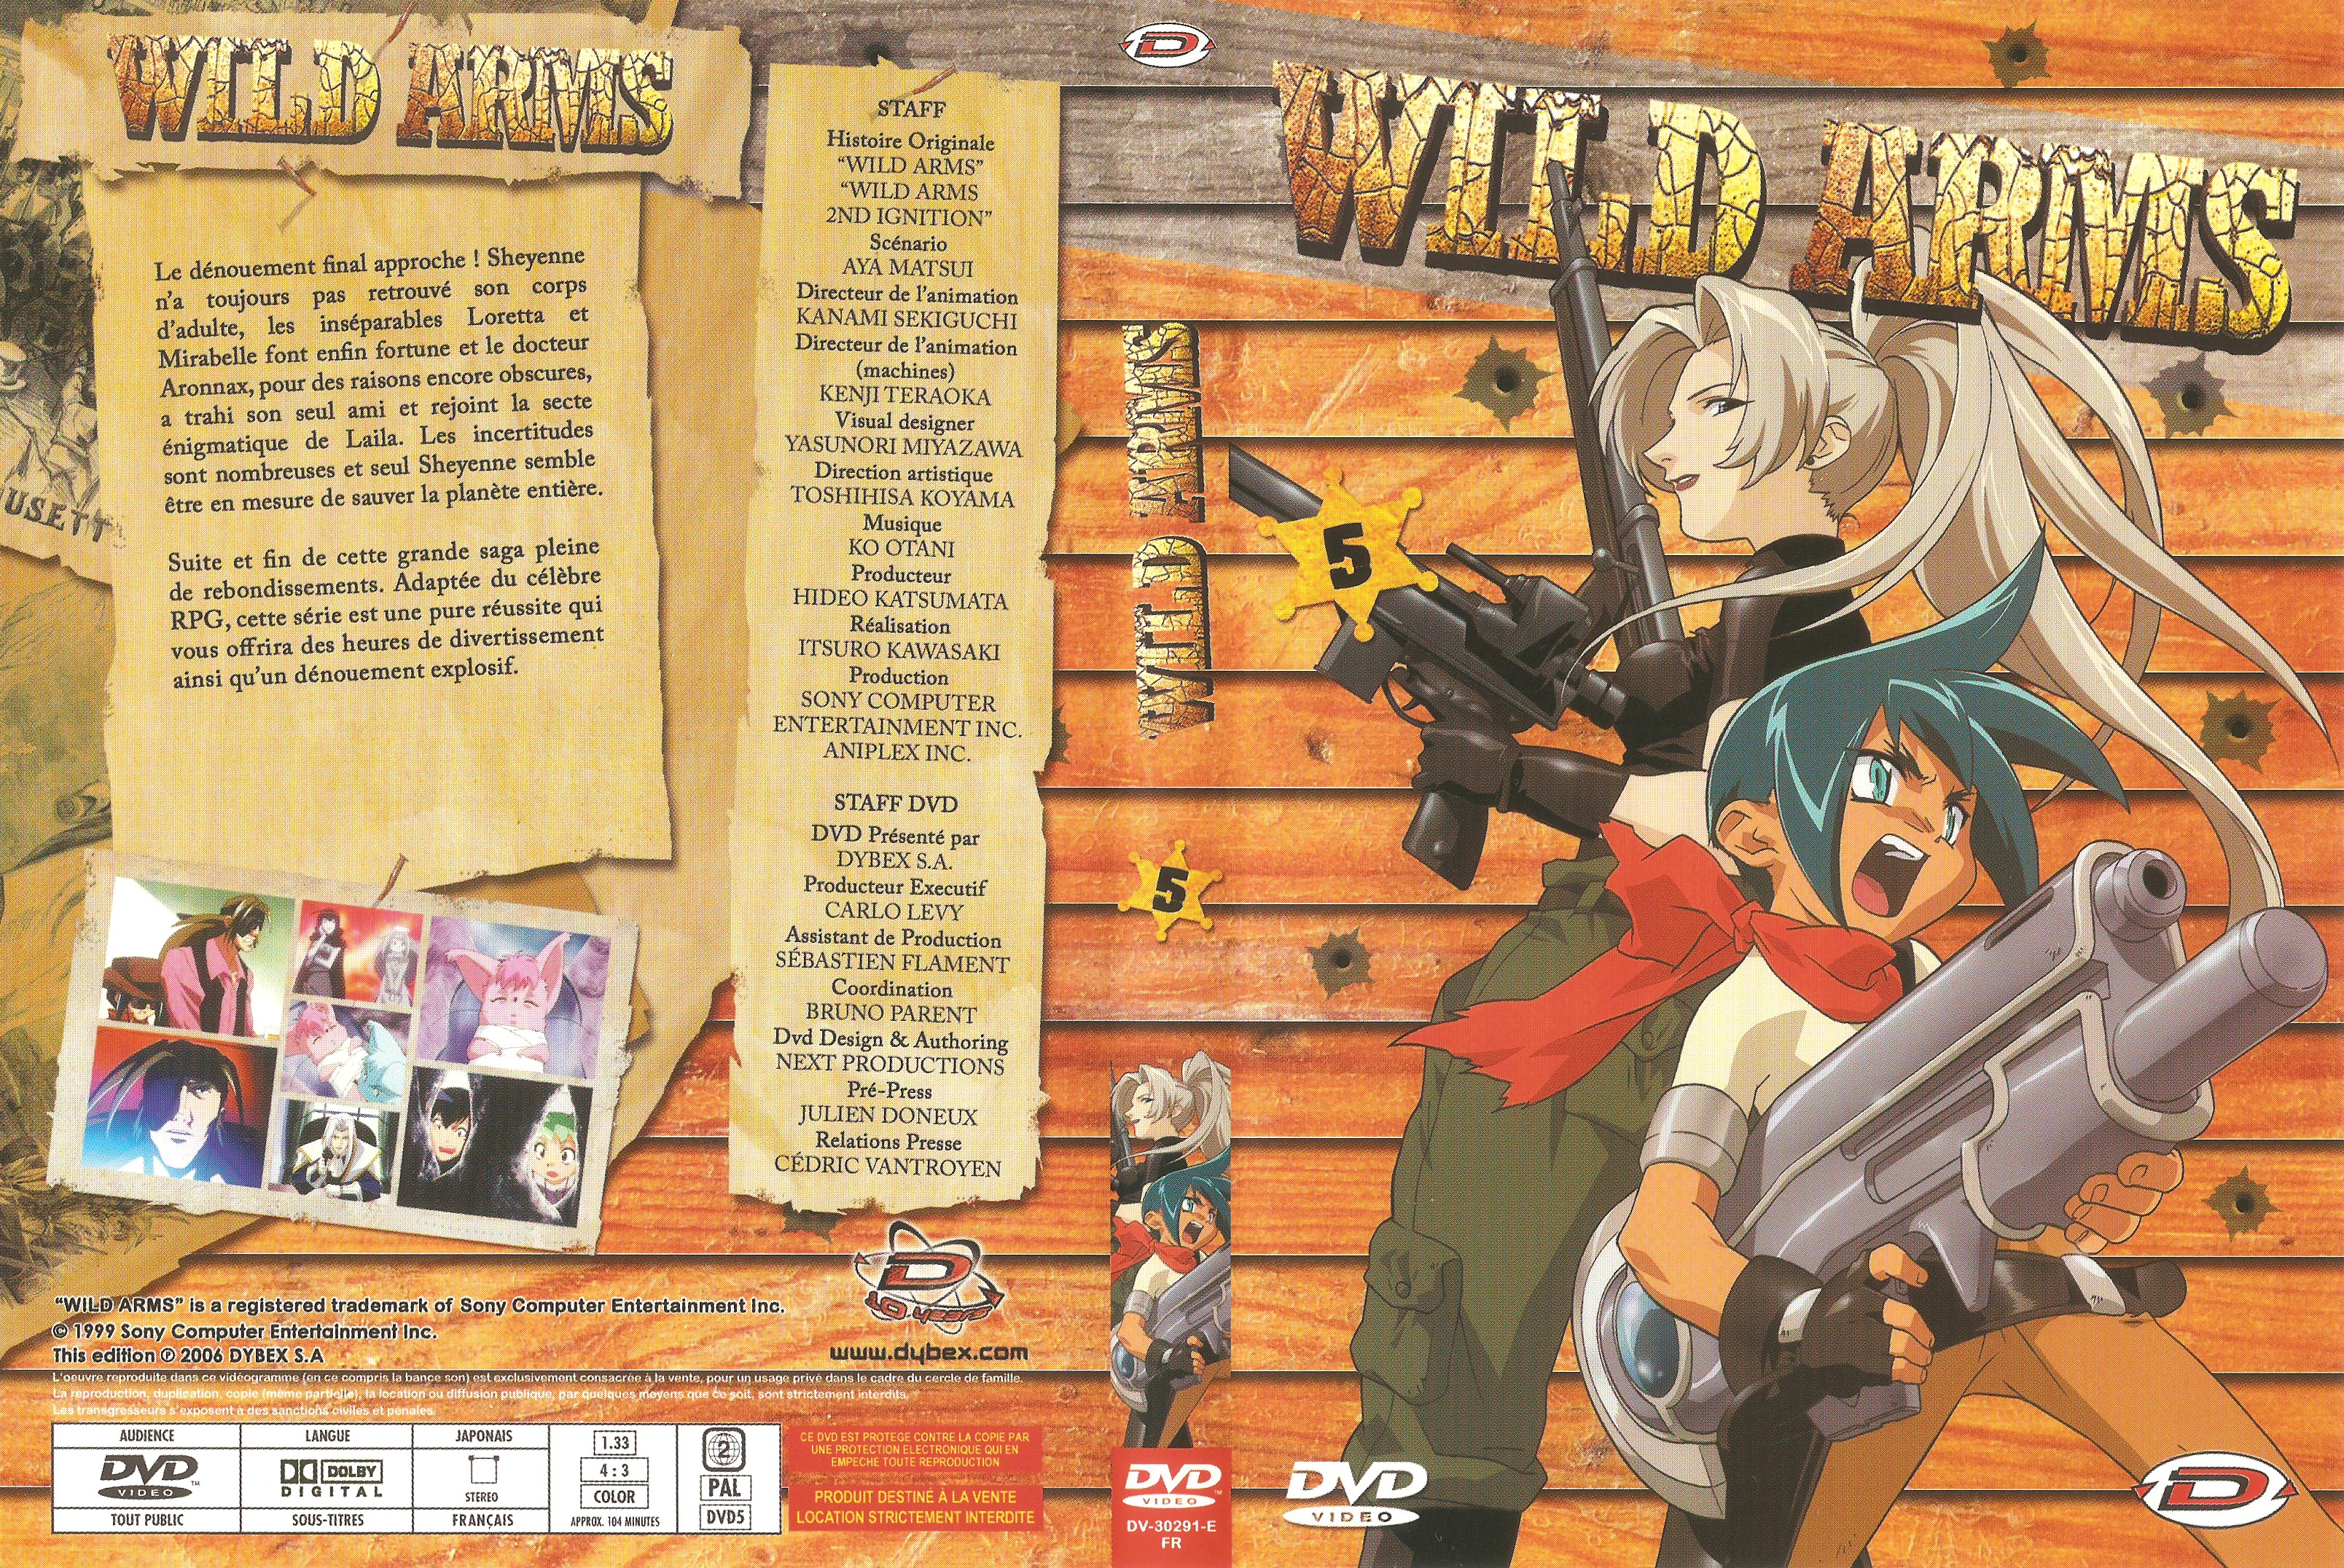 Jaquette DVD Wild Arms vol 5